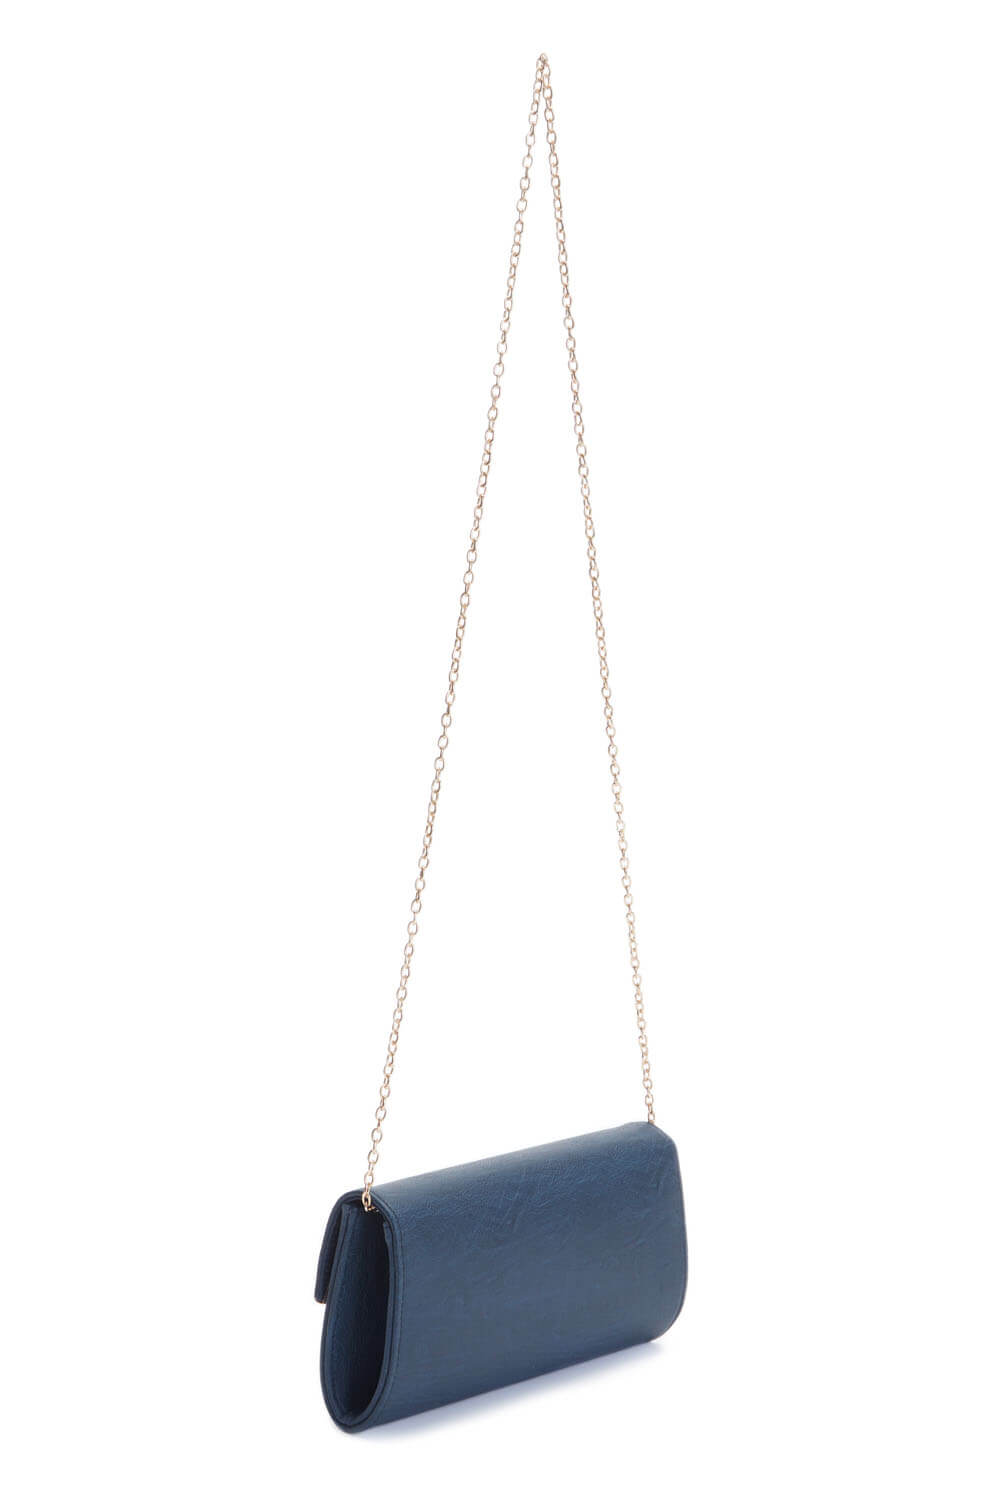 Navy  Rounded Envelope Clutch Bag, Image 2 of 5